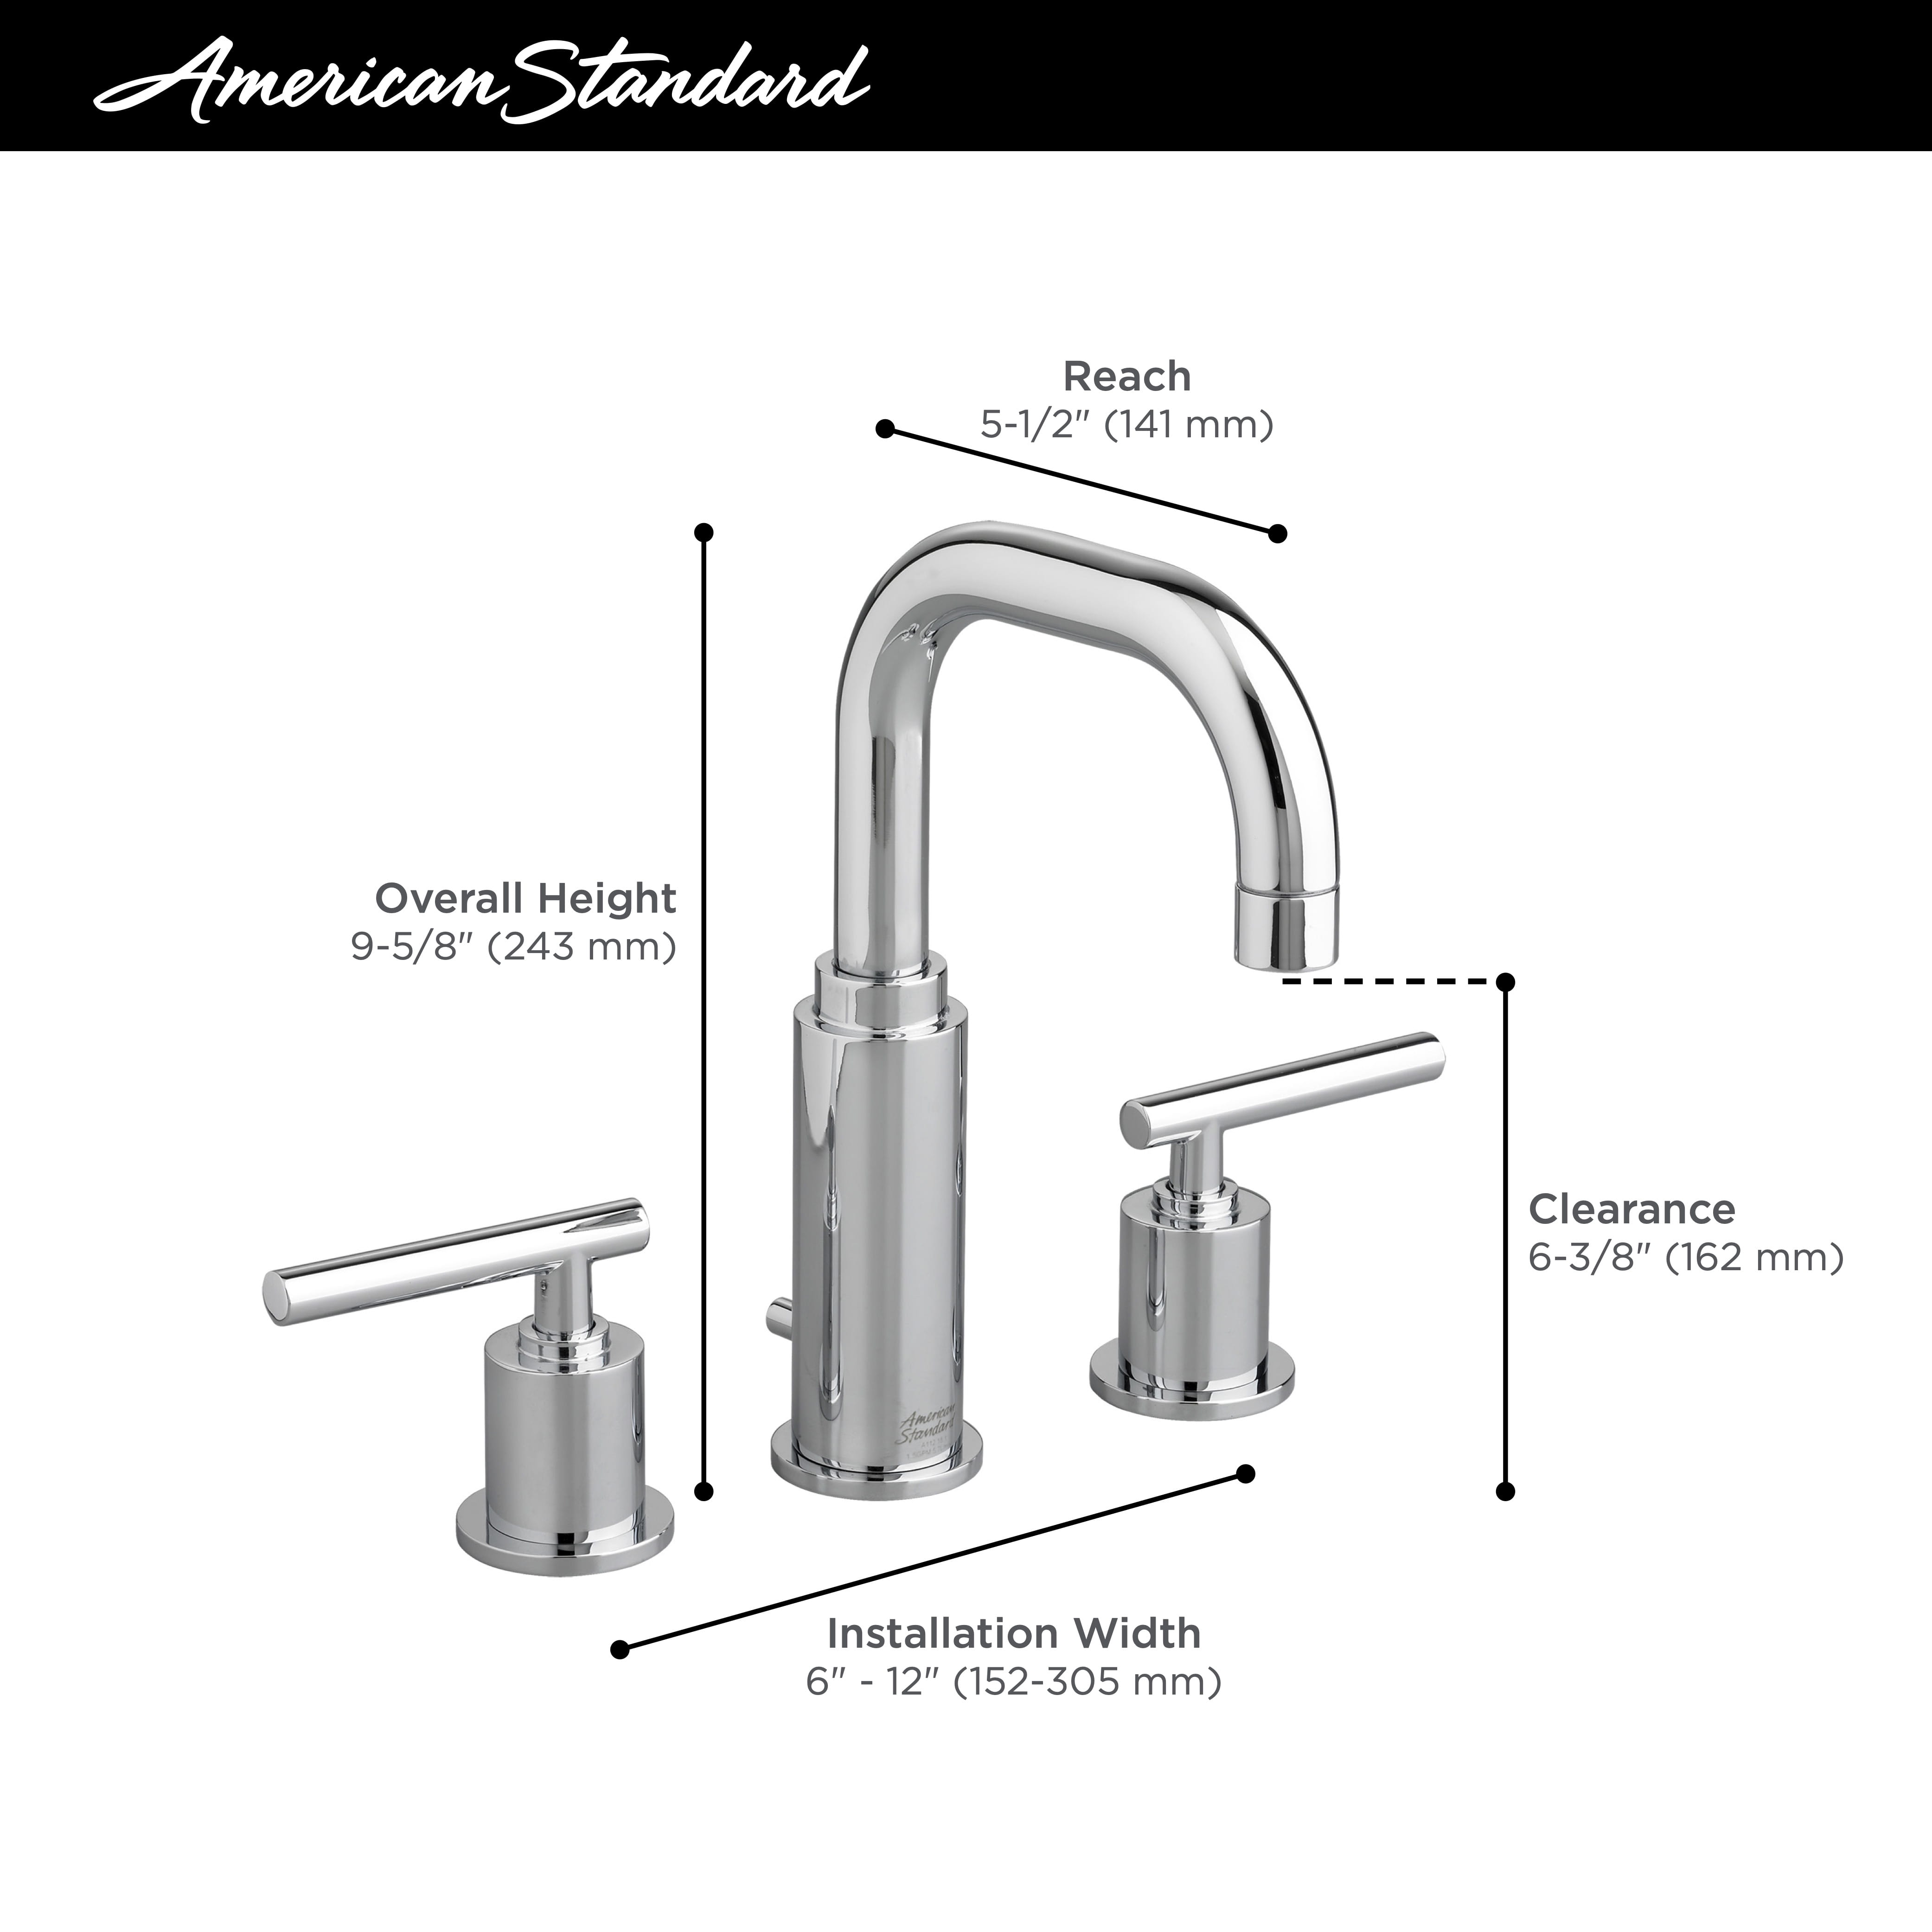 Serin 2 Handle 8 Inch Widespread Bathroom Faucet 12 gpm 45 L min With Lever Handles BRUSHED NICKEL